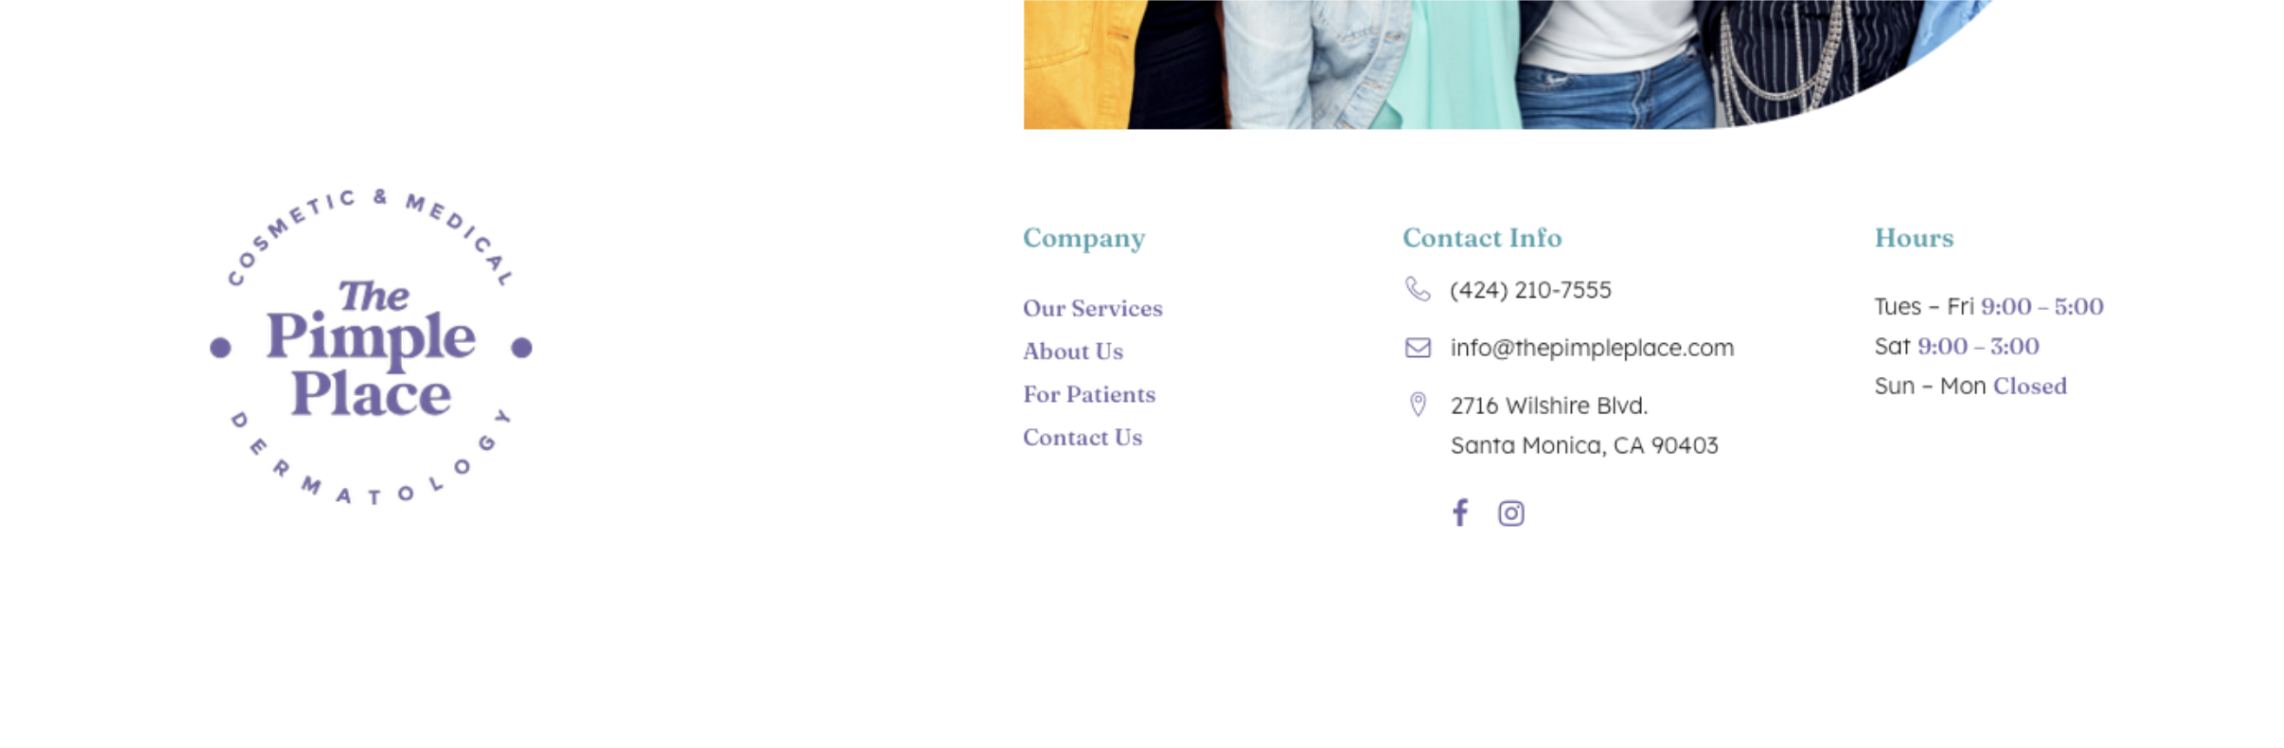 great footer example for contact info